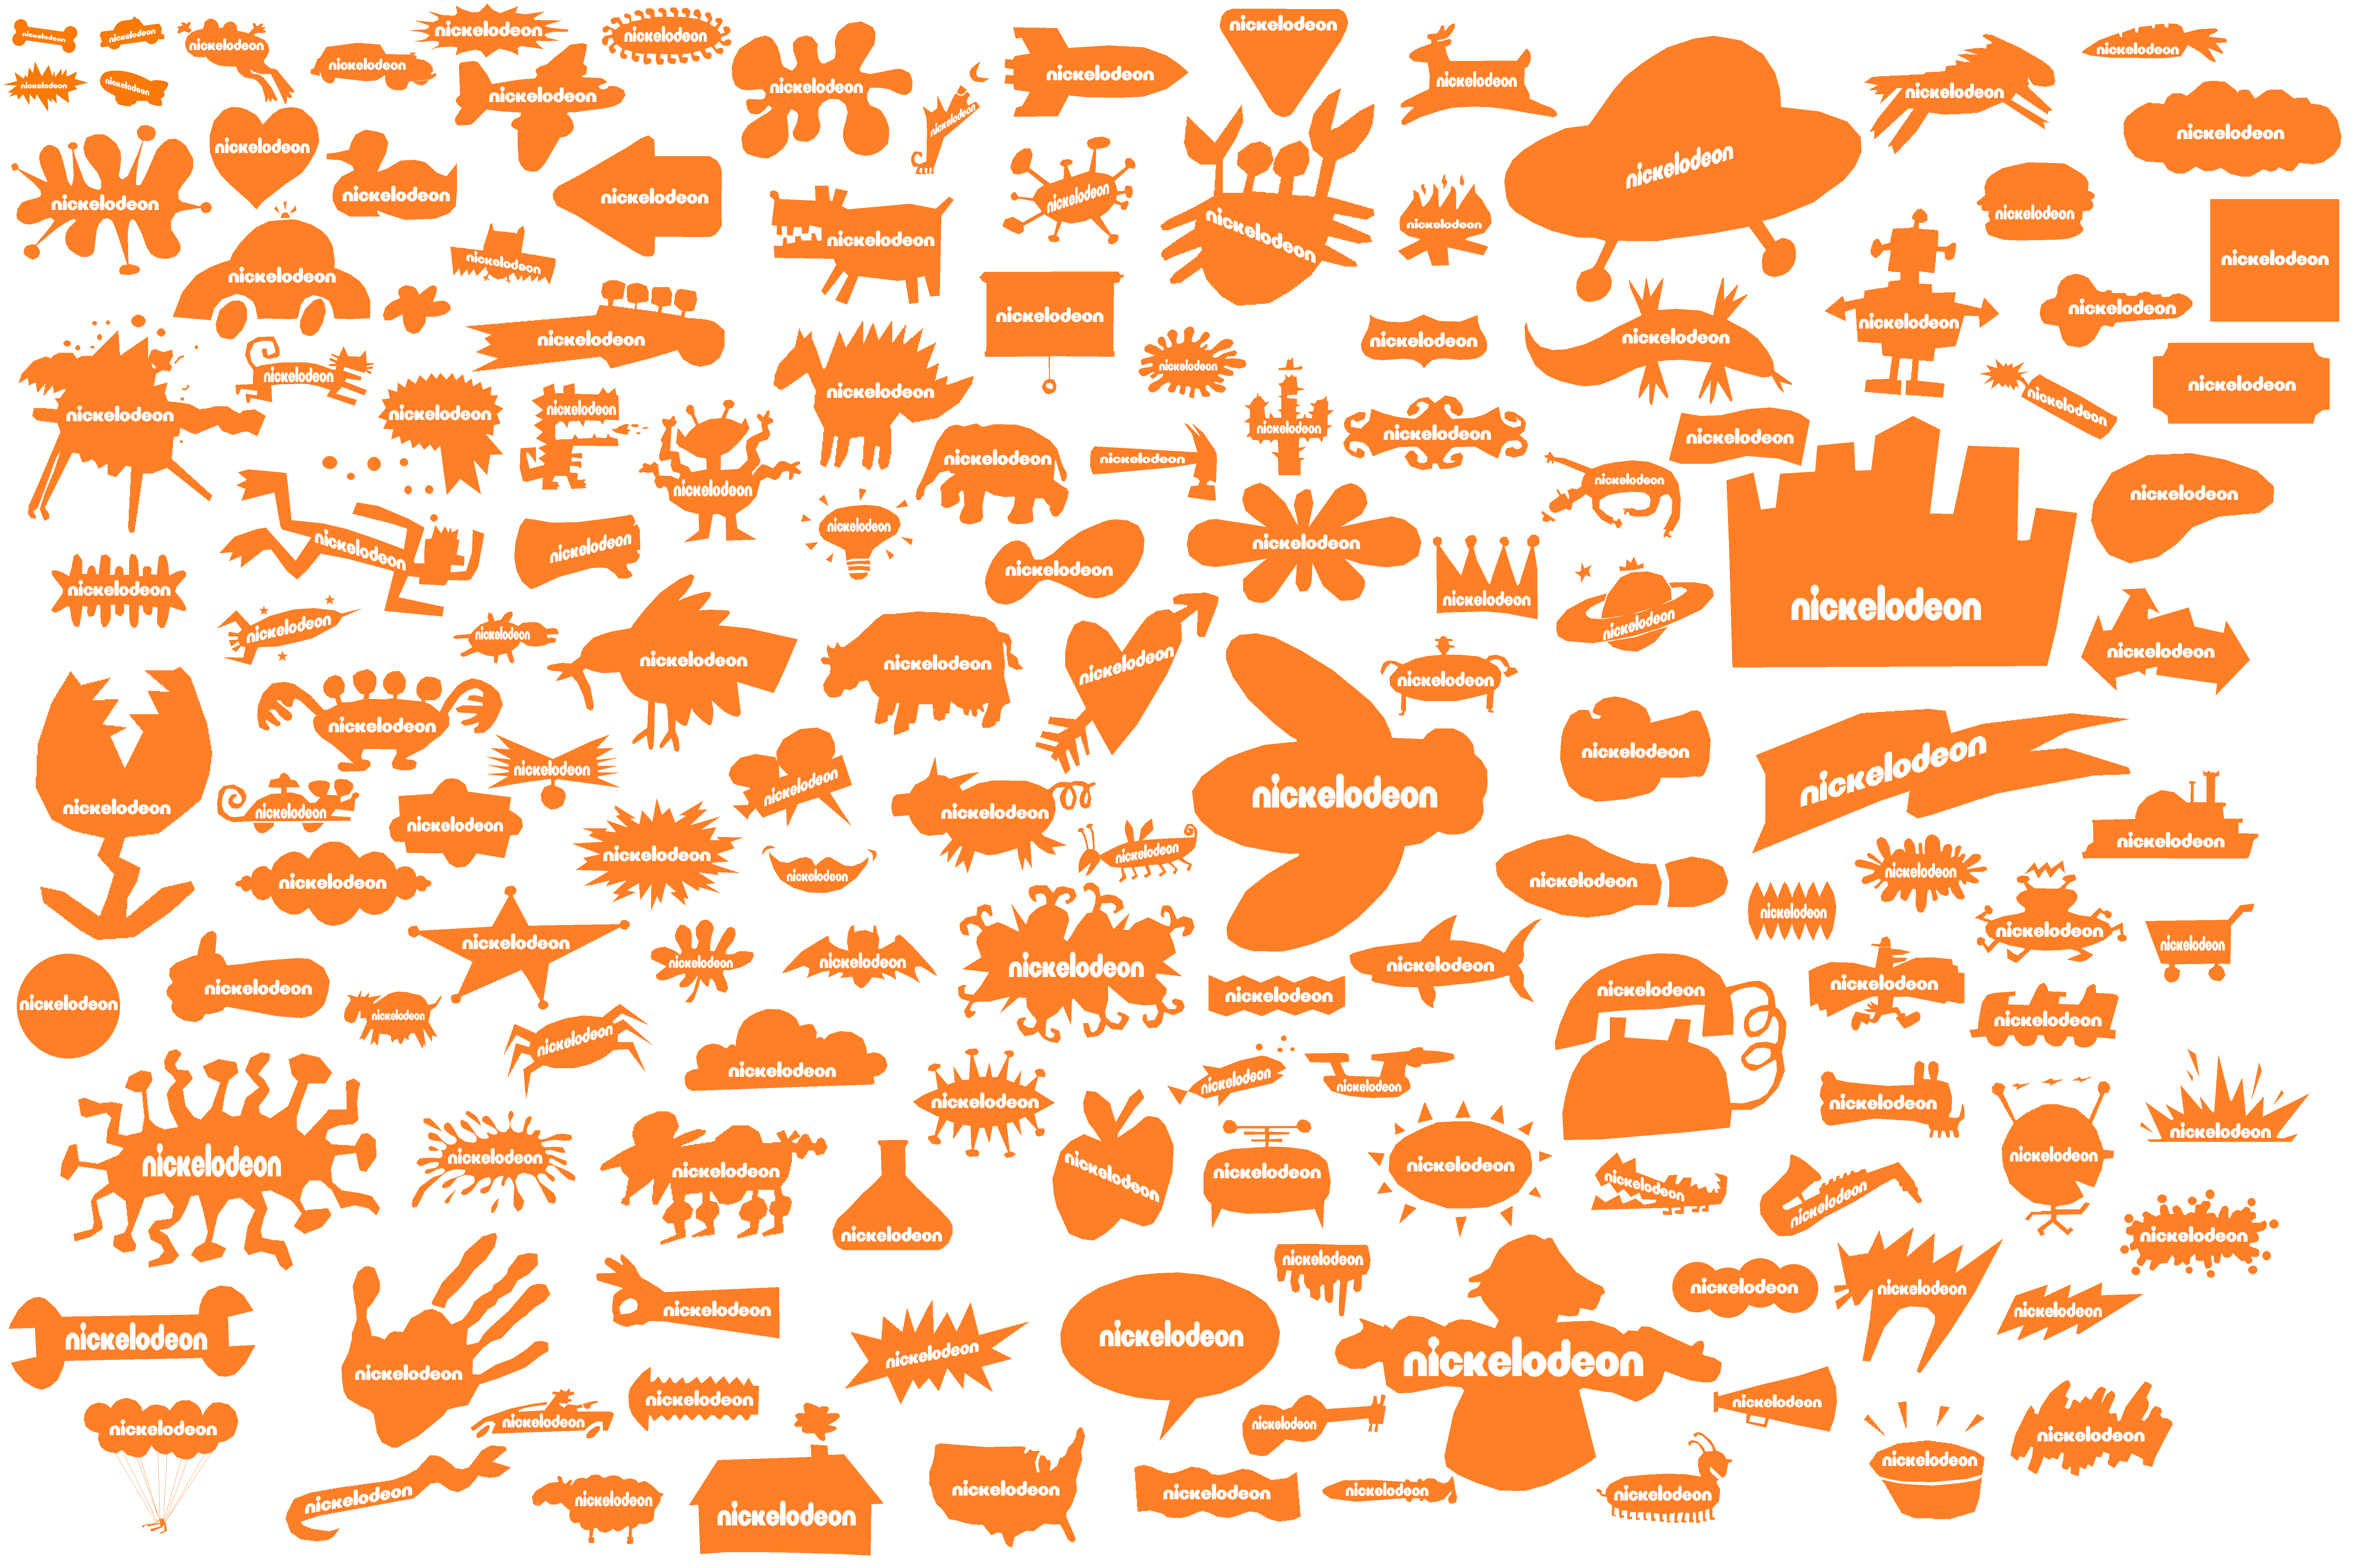 Nickelodeon Logo - What If The Current Nickelodeon Logo ran into the Old Nick Logos ...